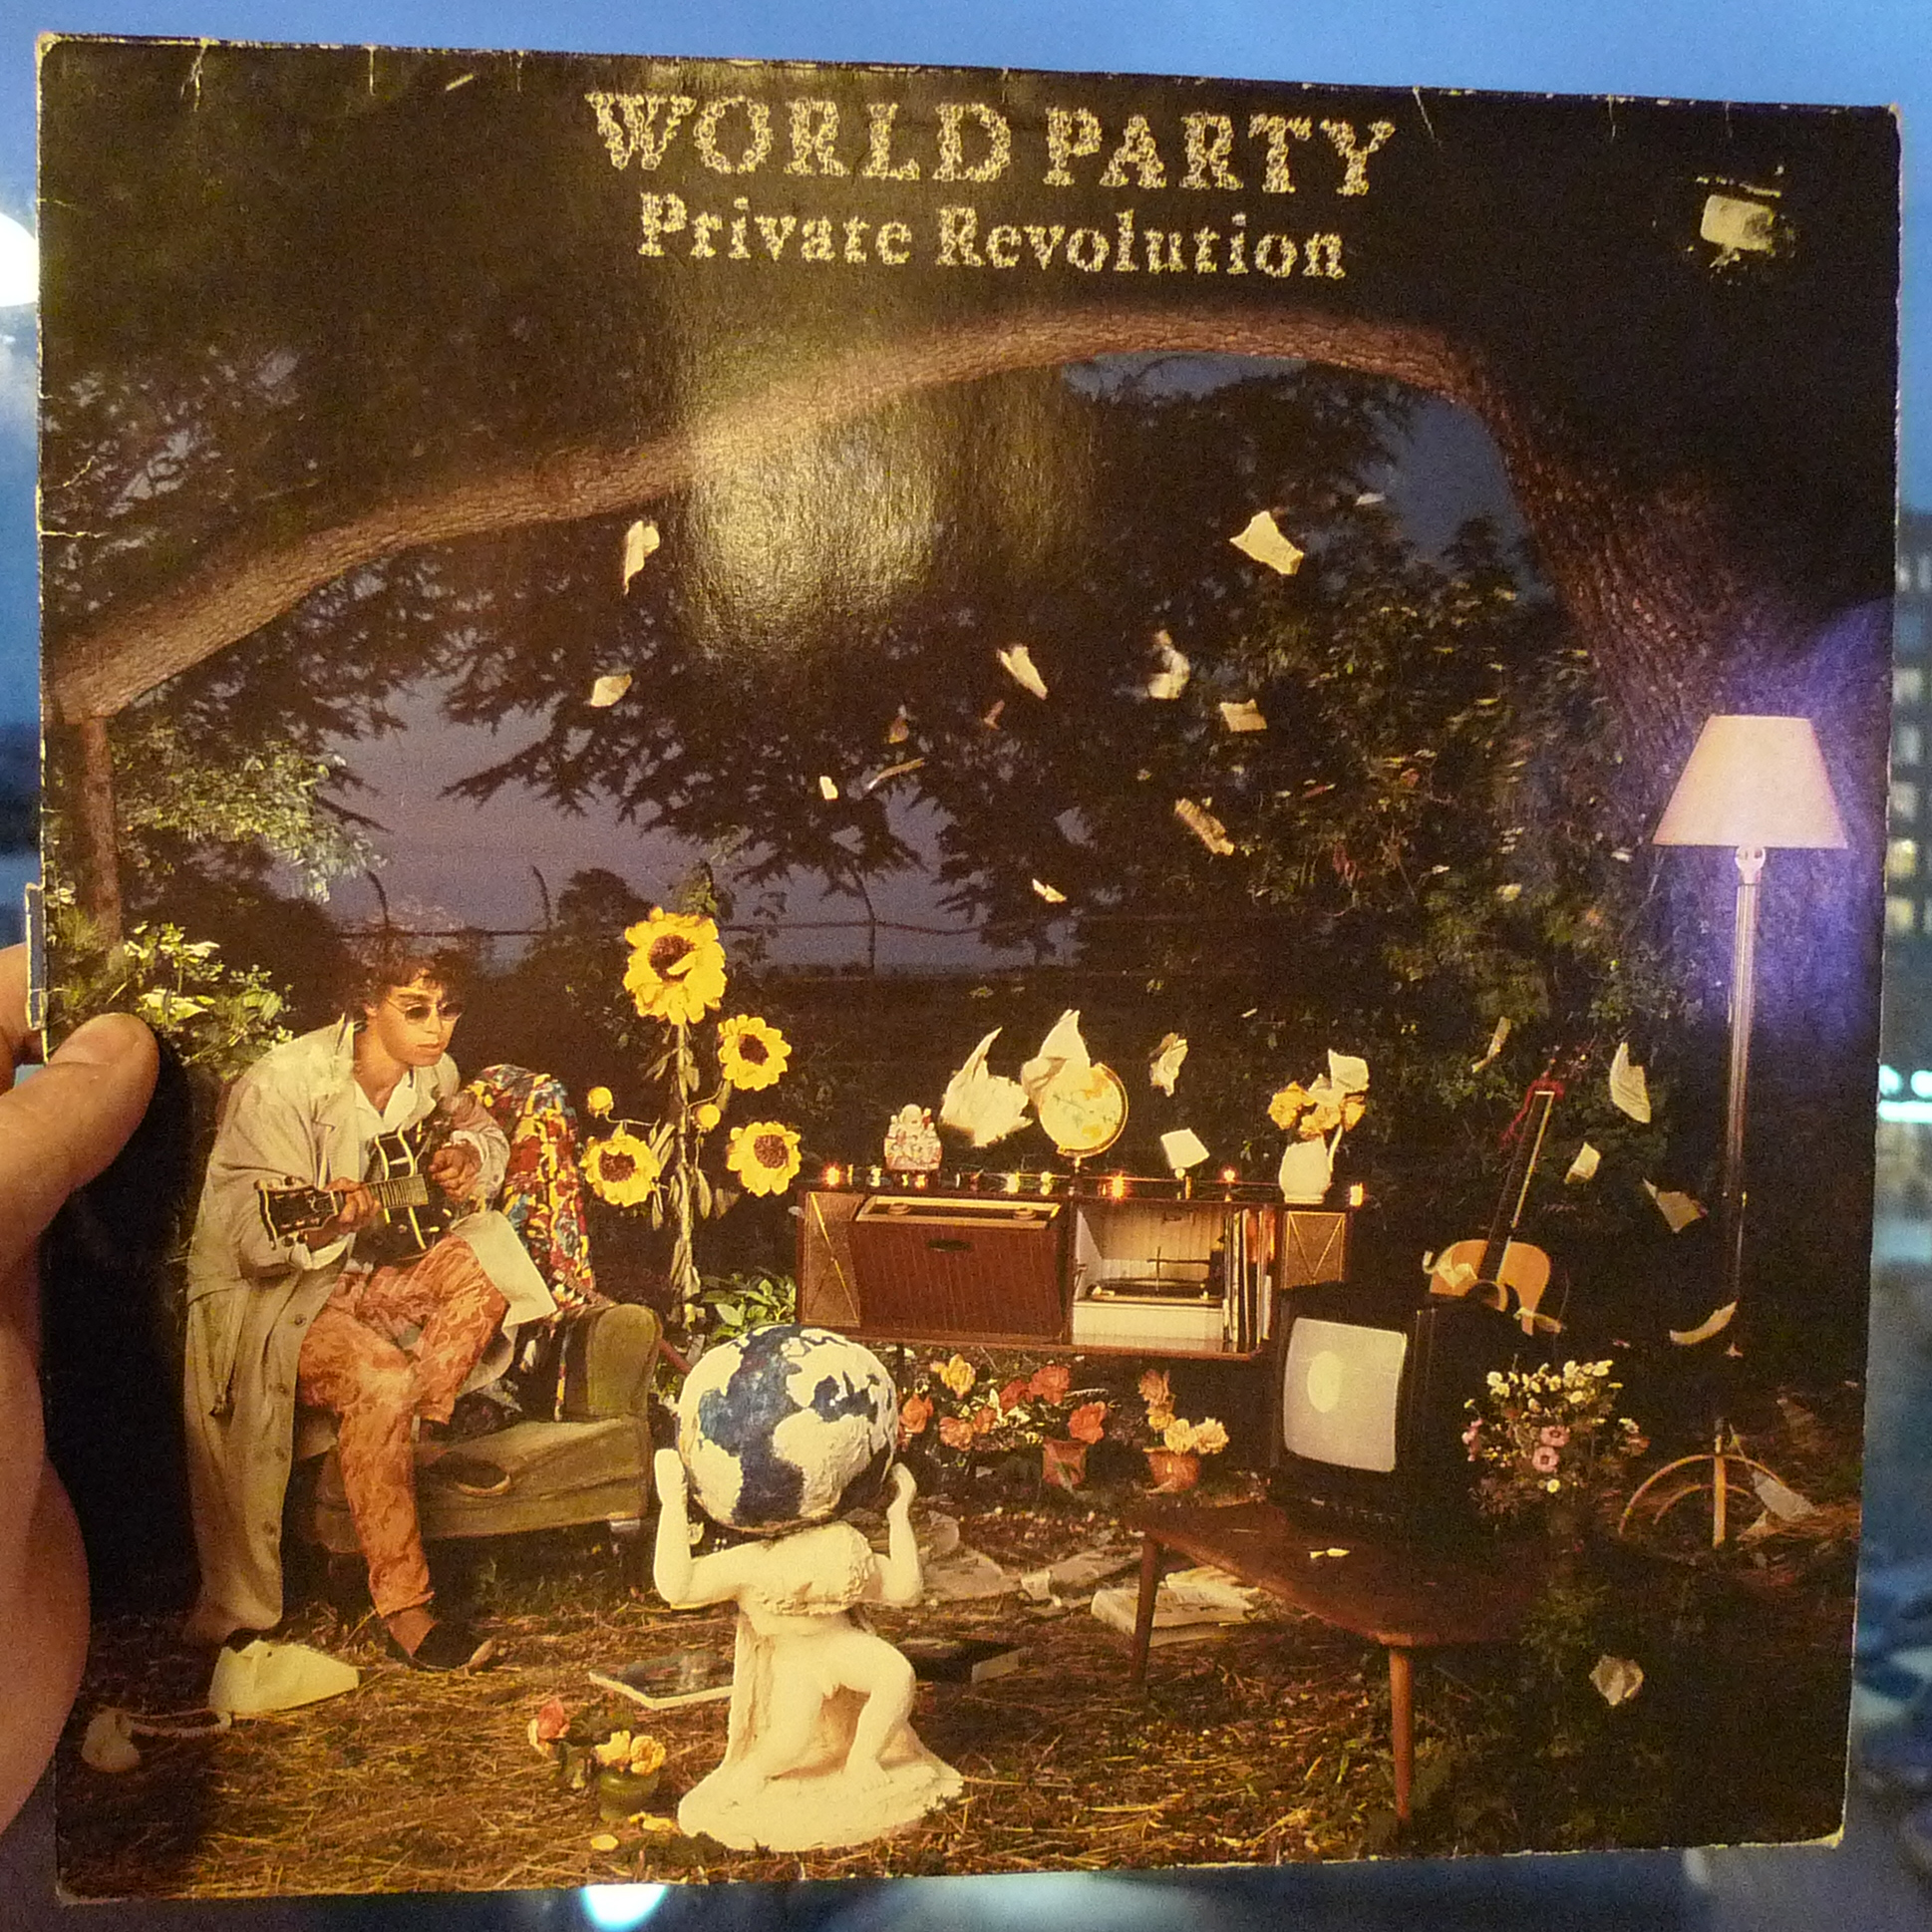 dj50 ep070 sleeve worldparty